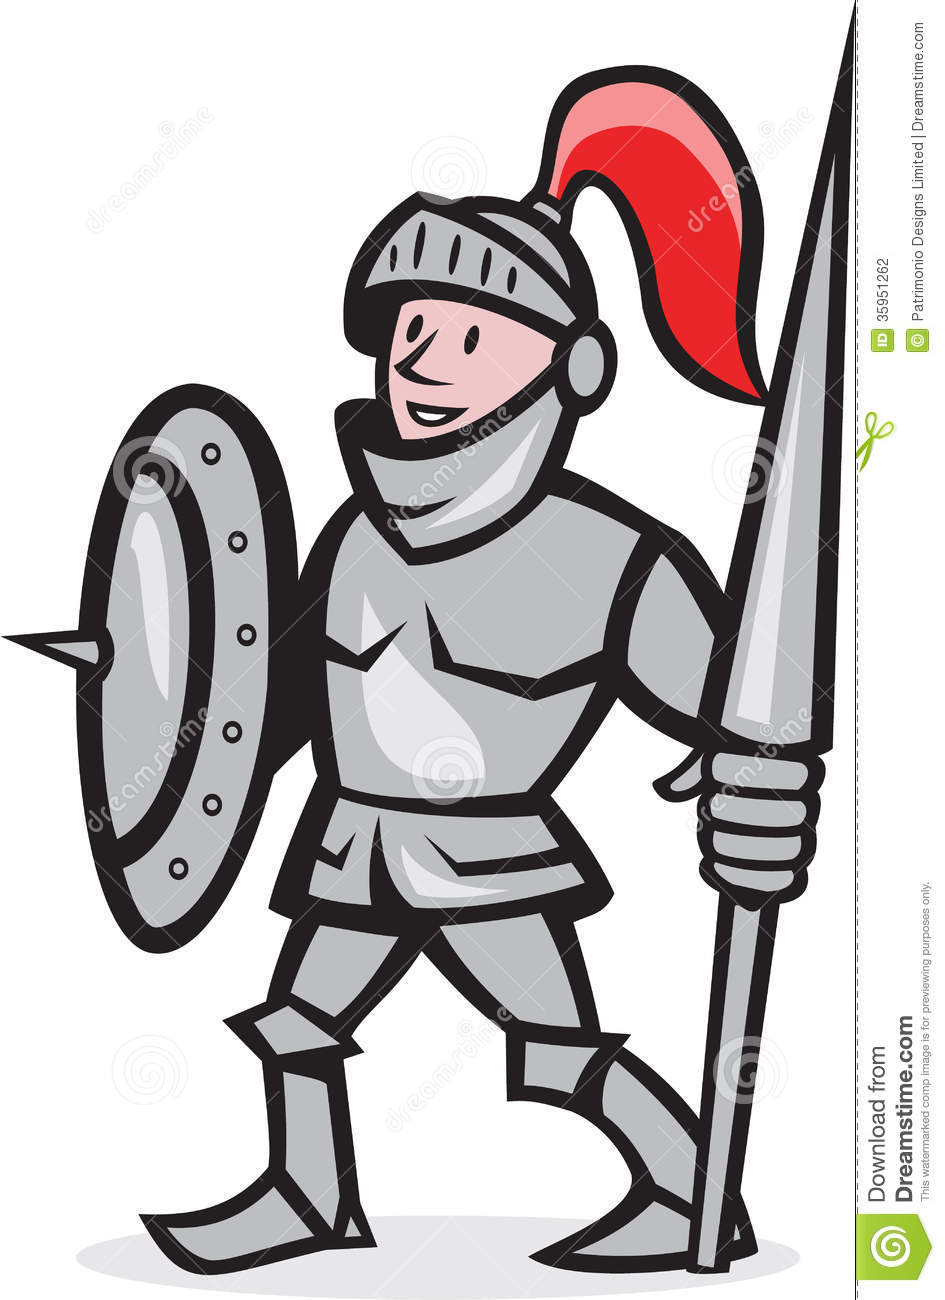 Clipart Of A Knight.